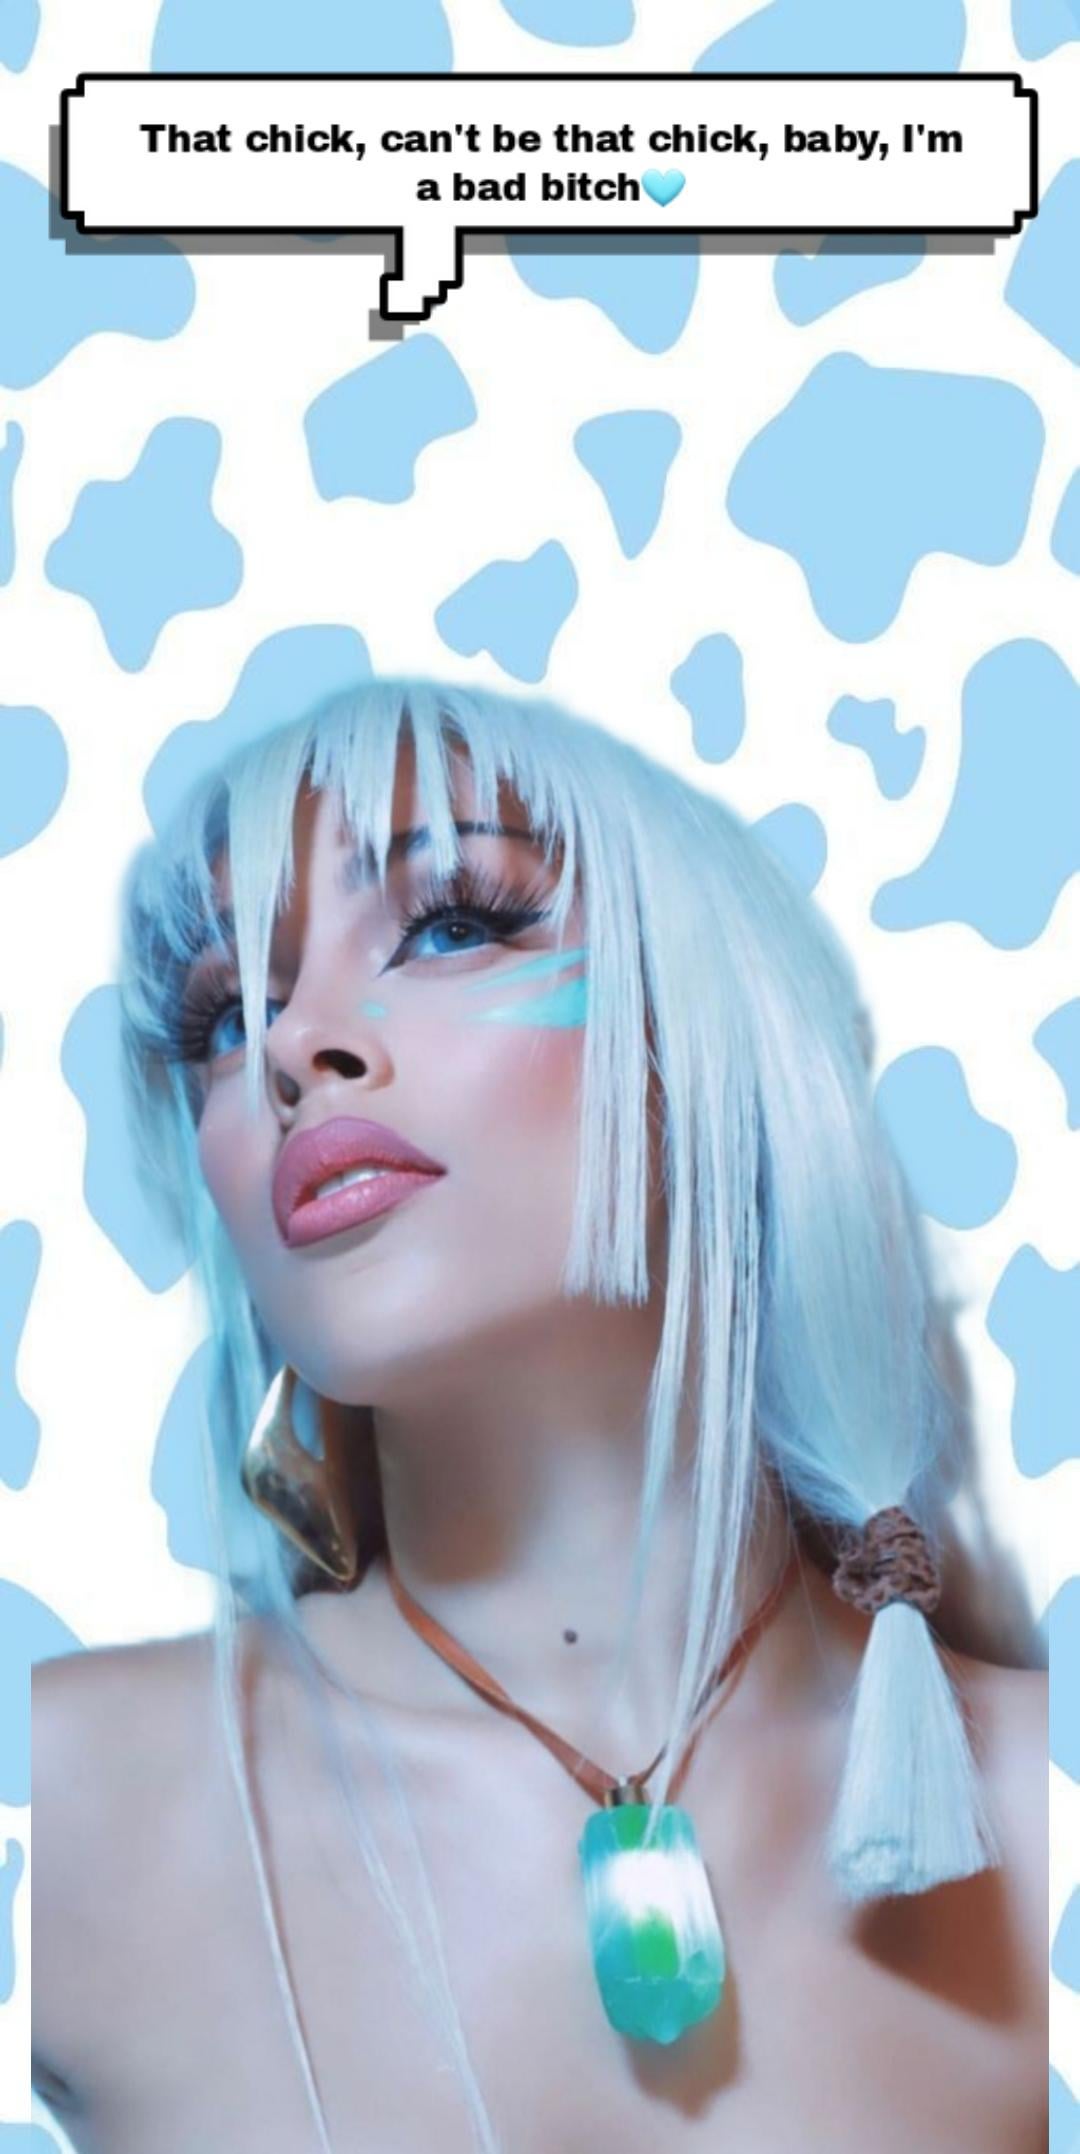 A woman with blue hair and white skin - Doja Cat